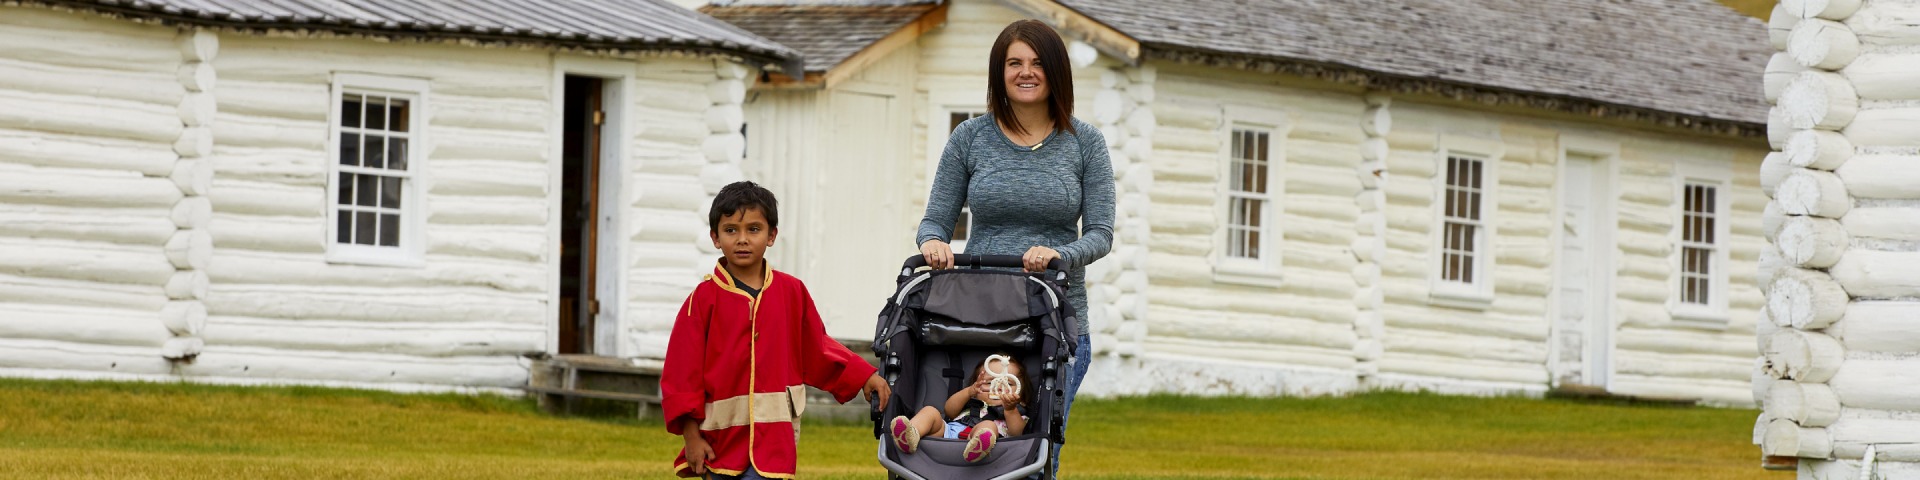 A family walking through the Fort with a stroller.